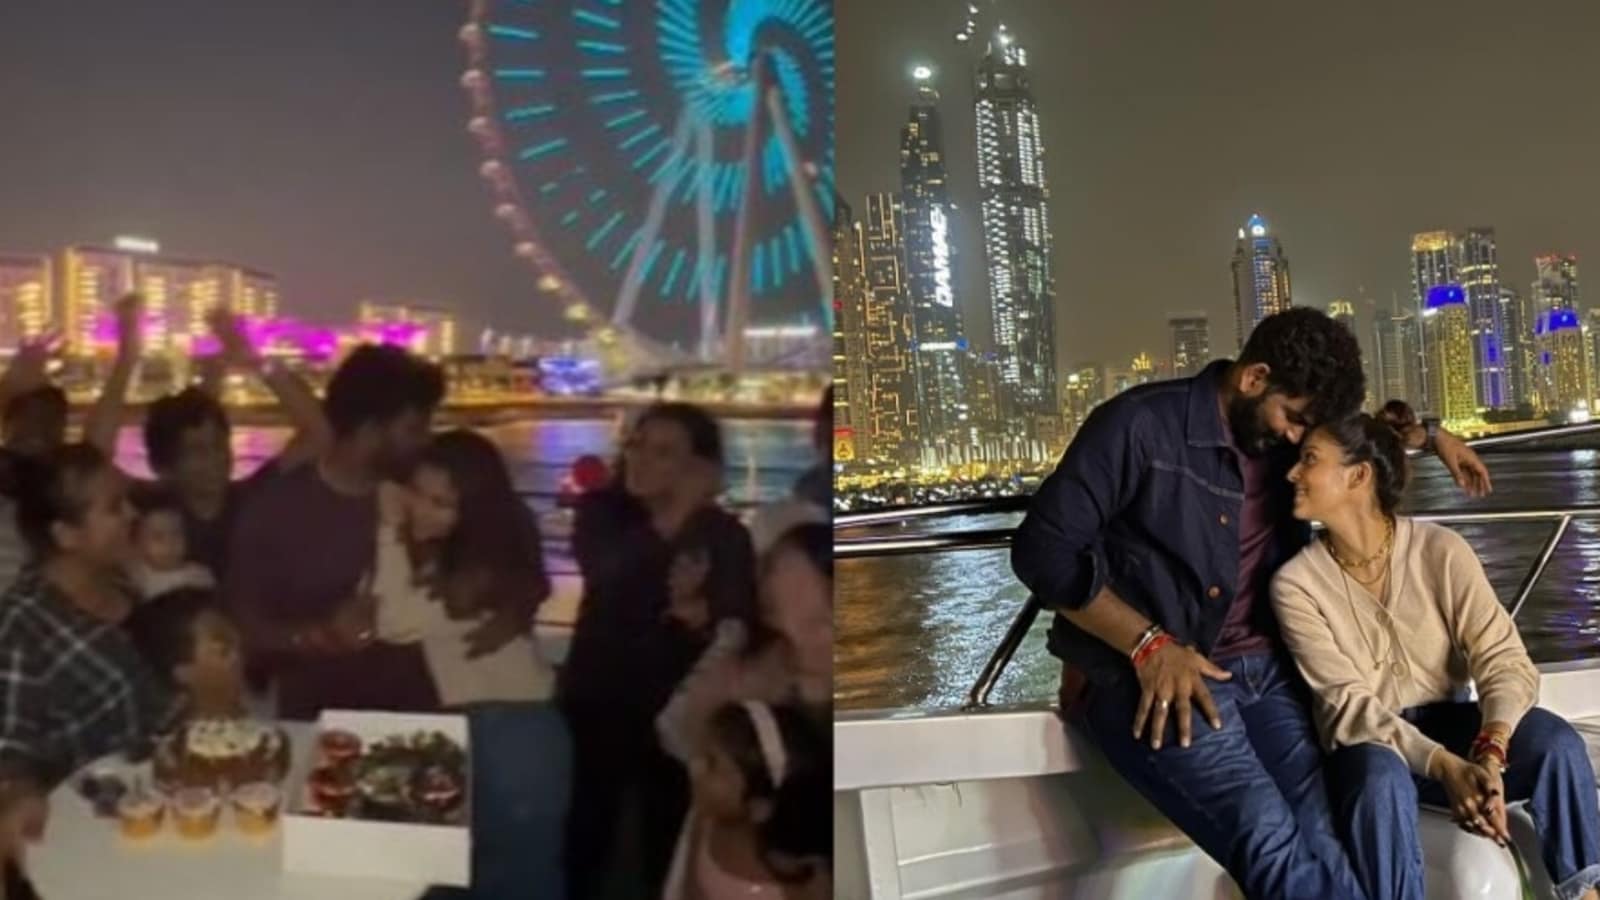 Vignesh Shivan kisses Nayanthara during birthday celebrations in Dubai in unseen video, says it was ‘too emotional’